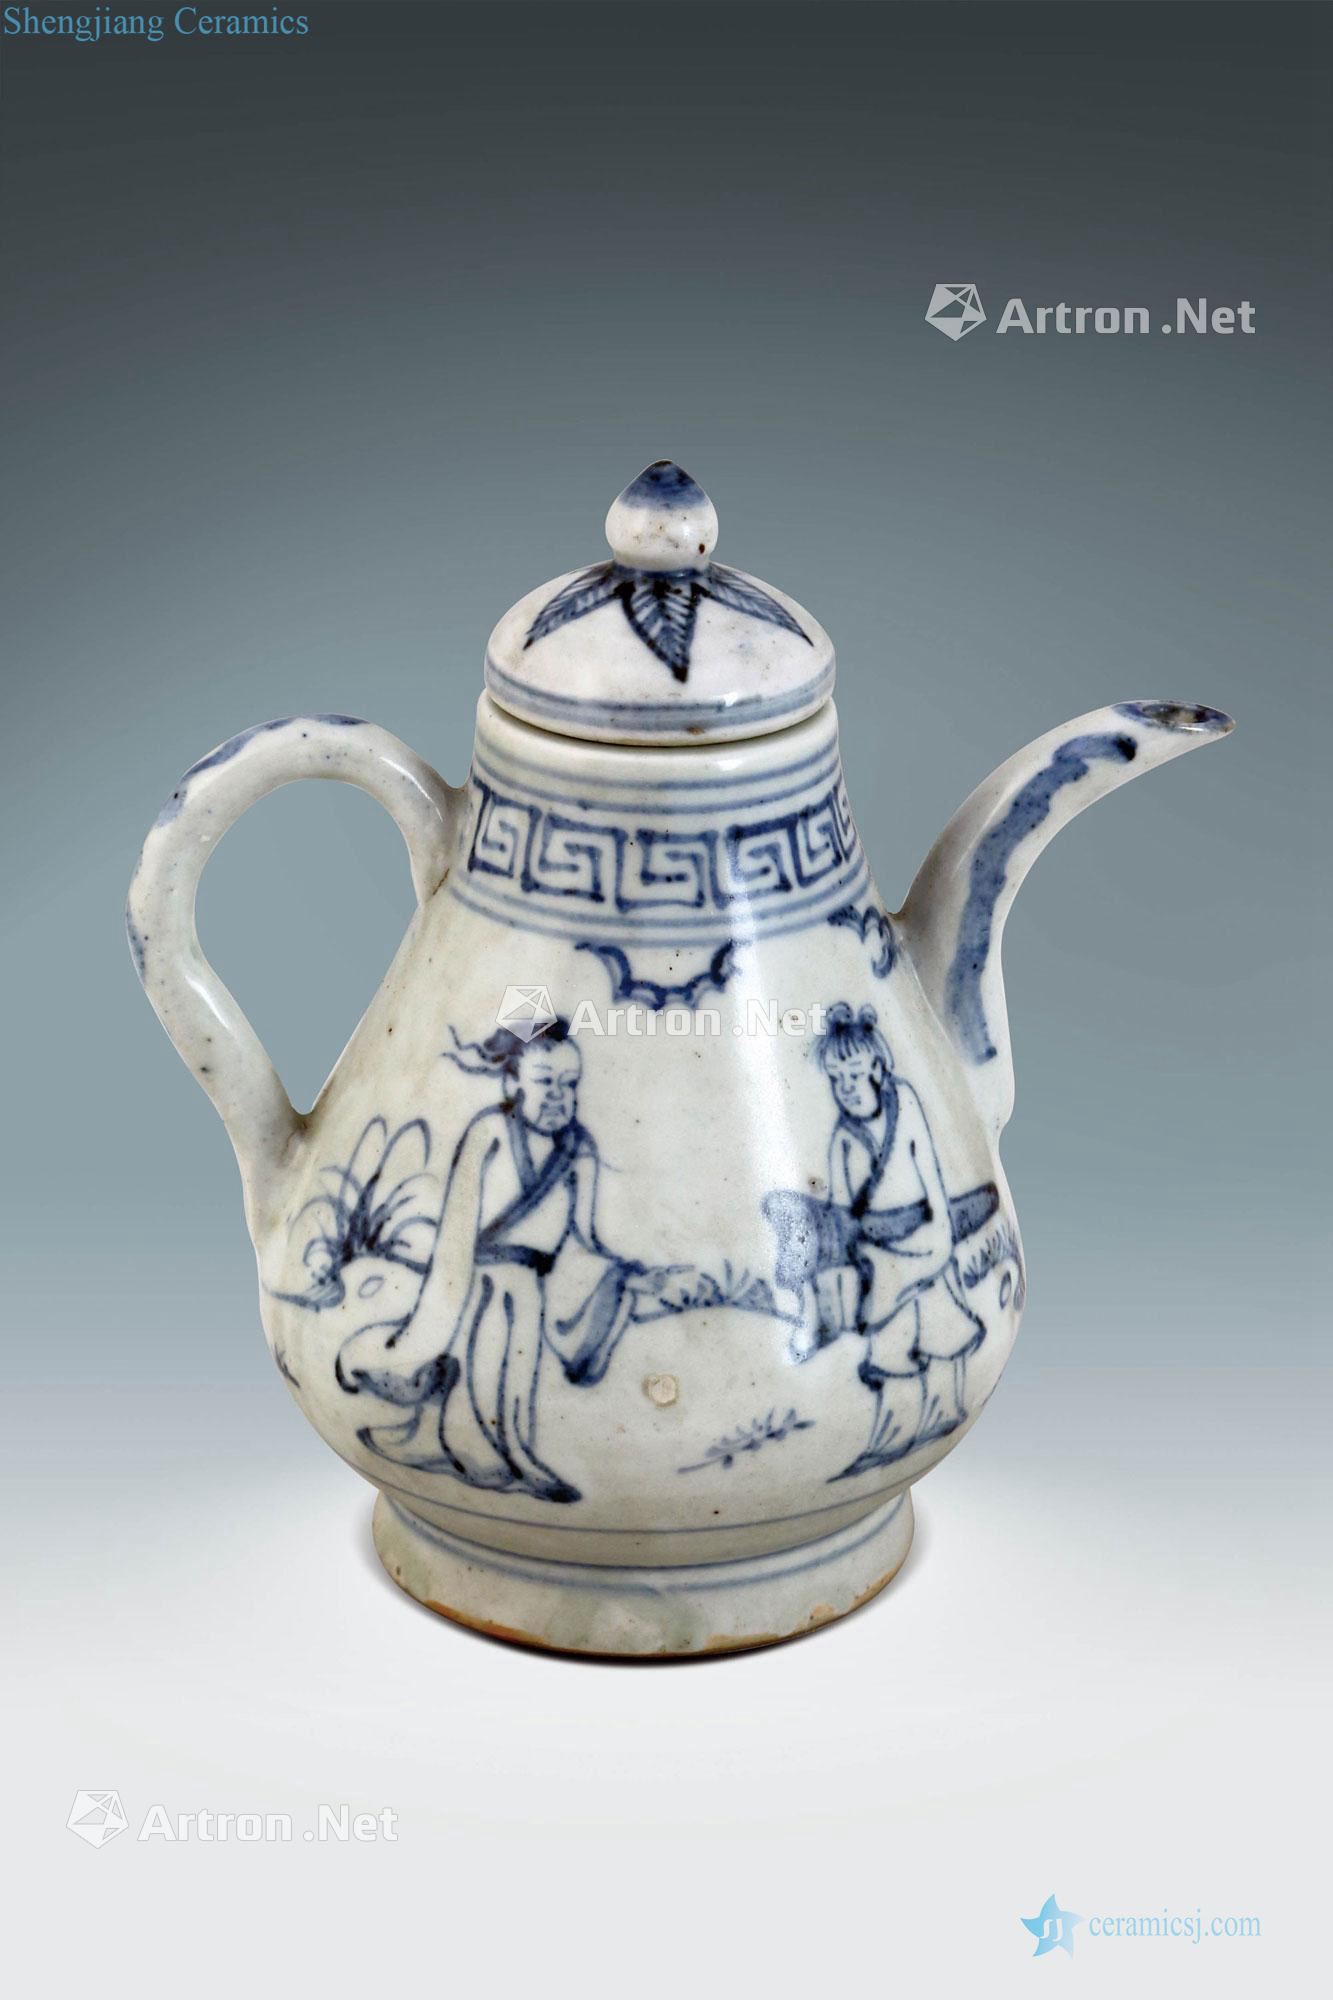 Qing dynasty blue and white lines CiHu characters